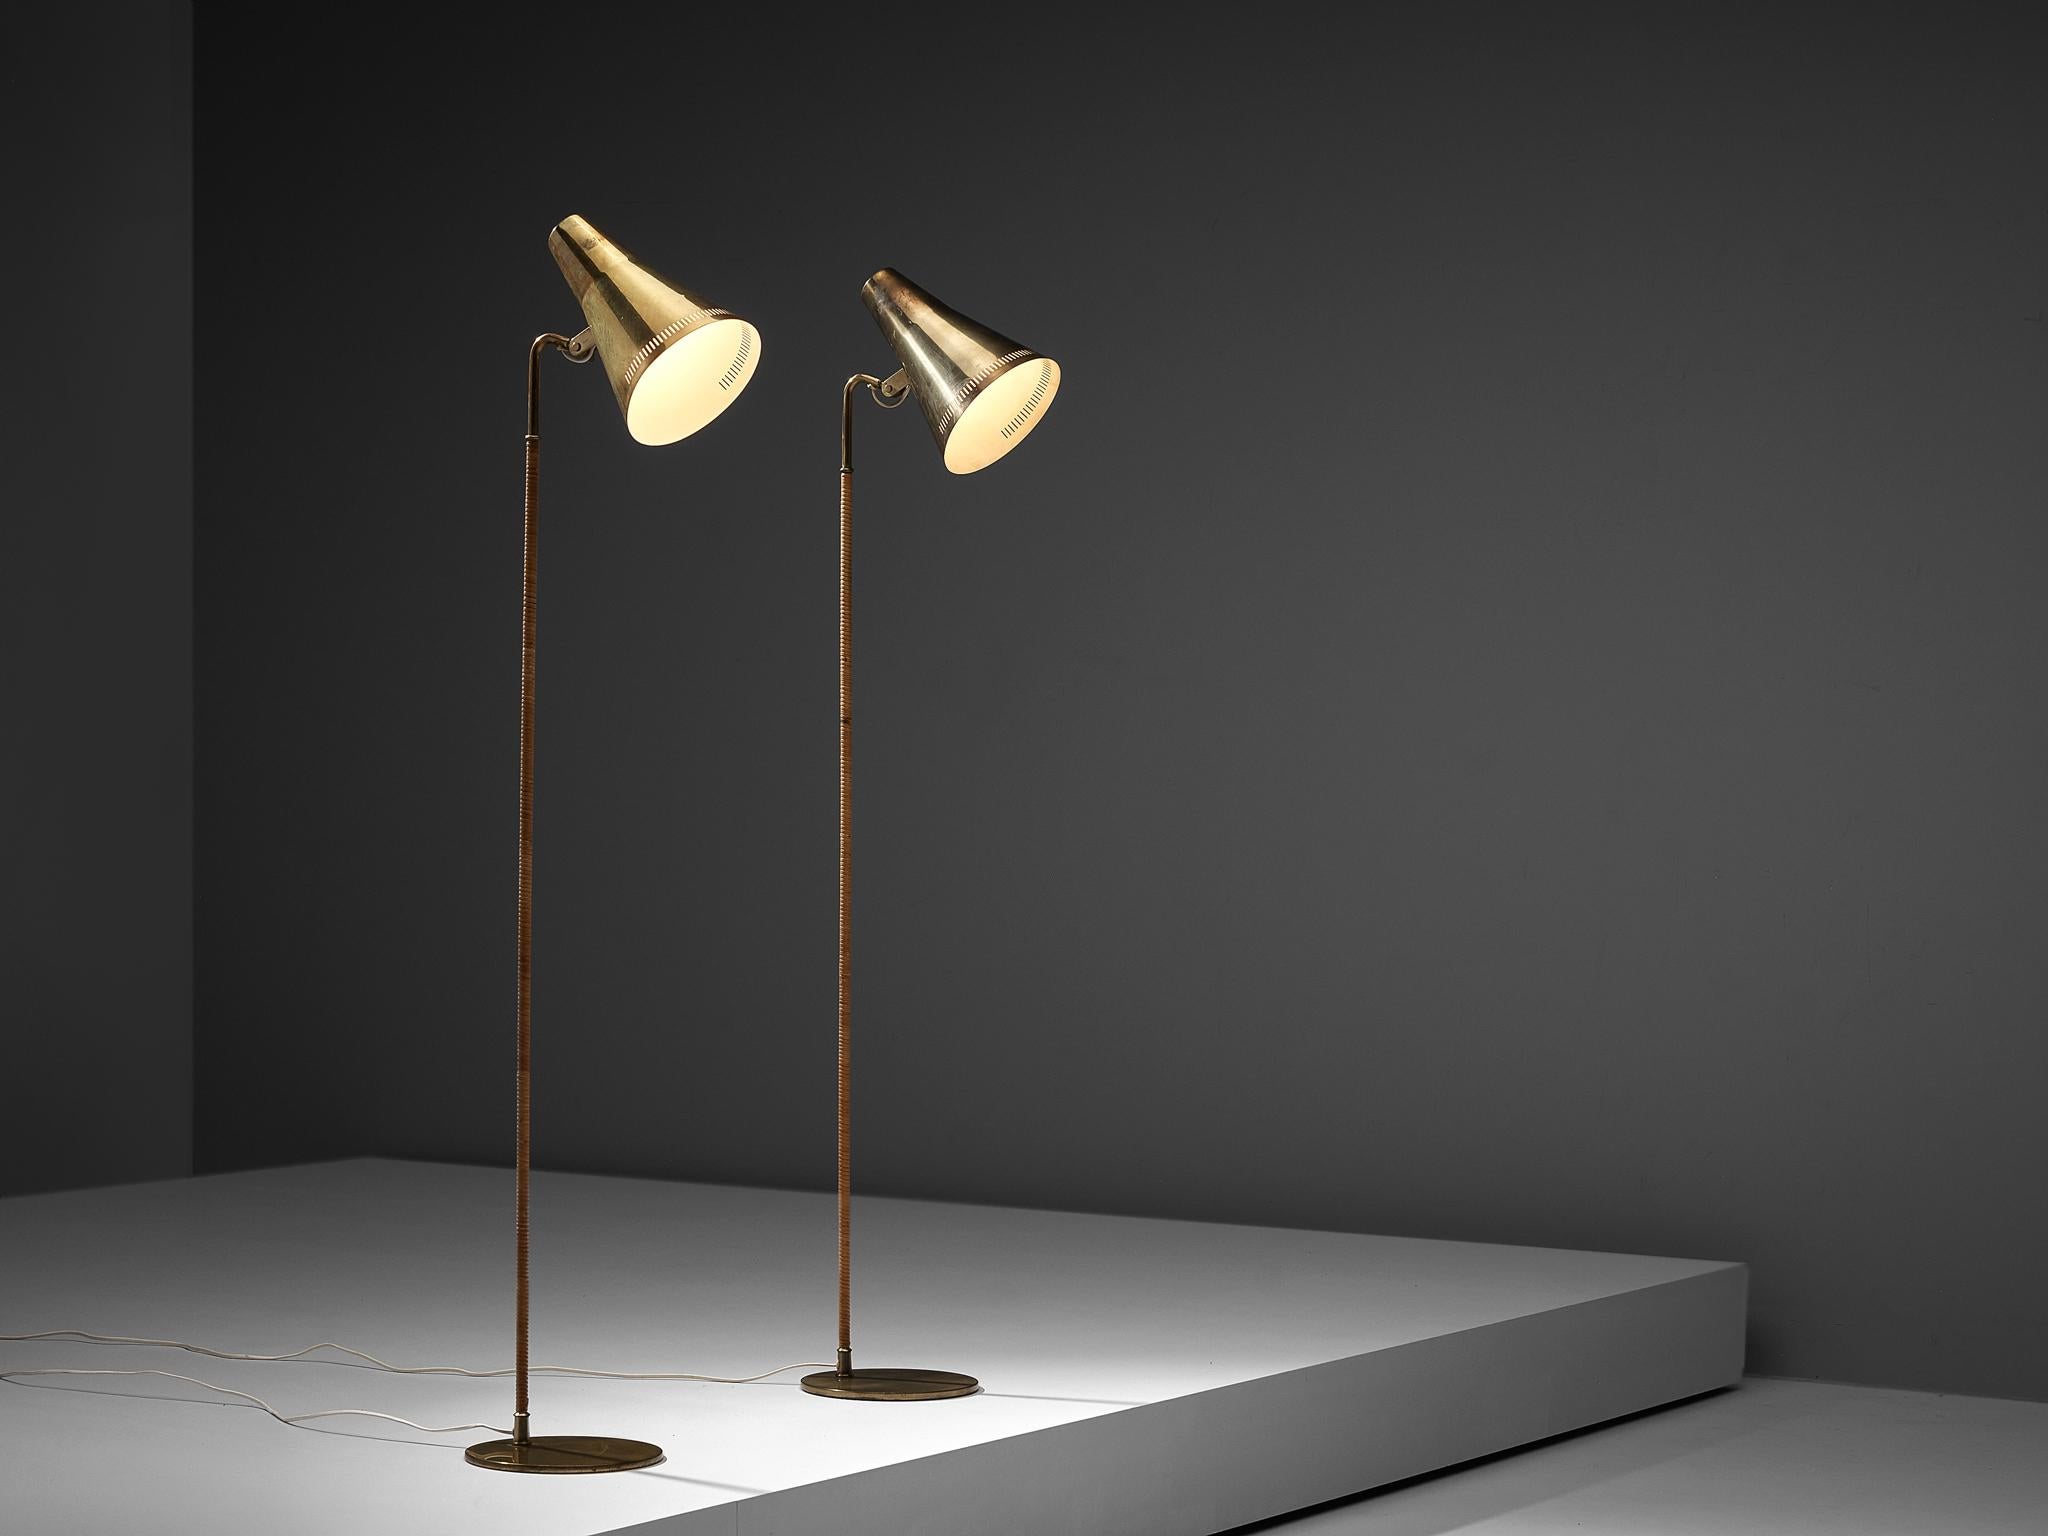 Paavo Tynell for Taito, pair of floor lamps K-10, lacquered metal, brass, cane, Finland, 1950s

Outstanding pair of floor lamps, designed by Paavo Tynell, the Finnish design master of lighting. These delicate floor lamps have a few distinct